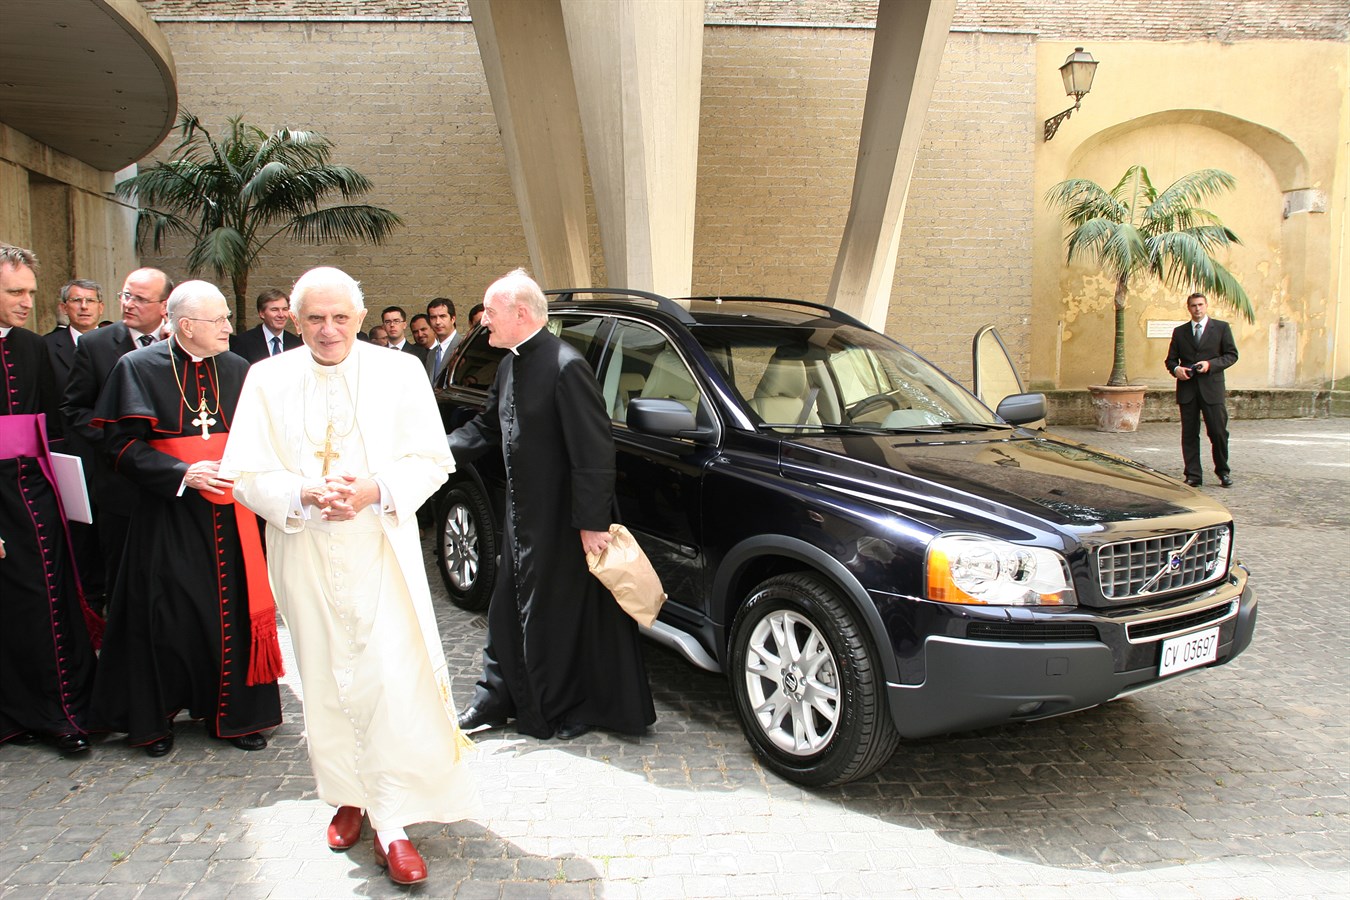 Volvo Cars presented His Holiness, Pope Benedict XVI, with a Volvo XC90 on Wednesday June 28th